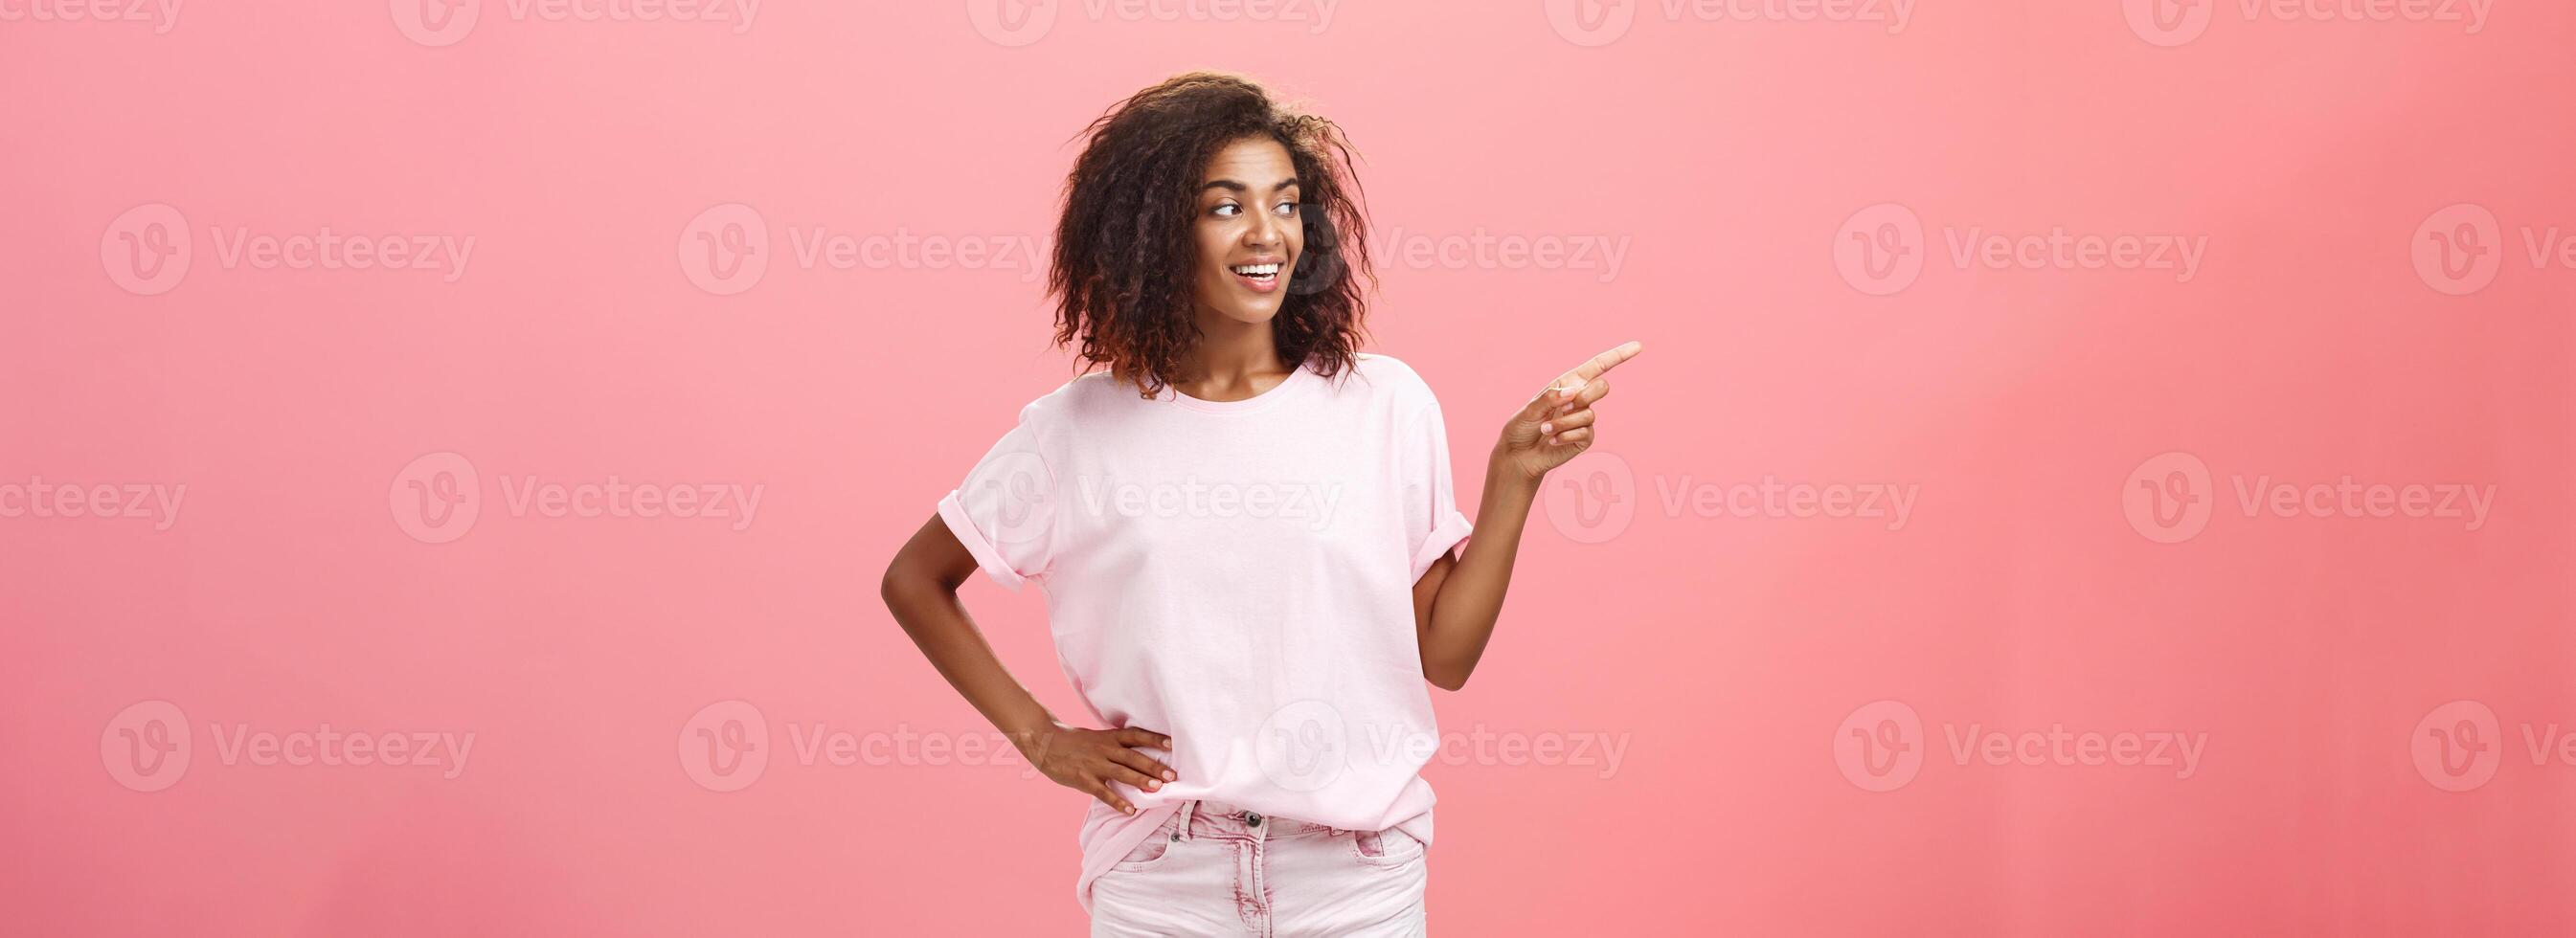 Girl checking out nice body of guy passing by. Charming confident dark-skinned female with curly hairstyle holding hand on hip looking and pointing left discussing cool copy space over pink wall photo